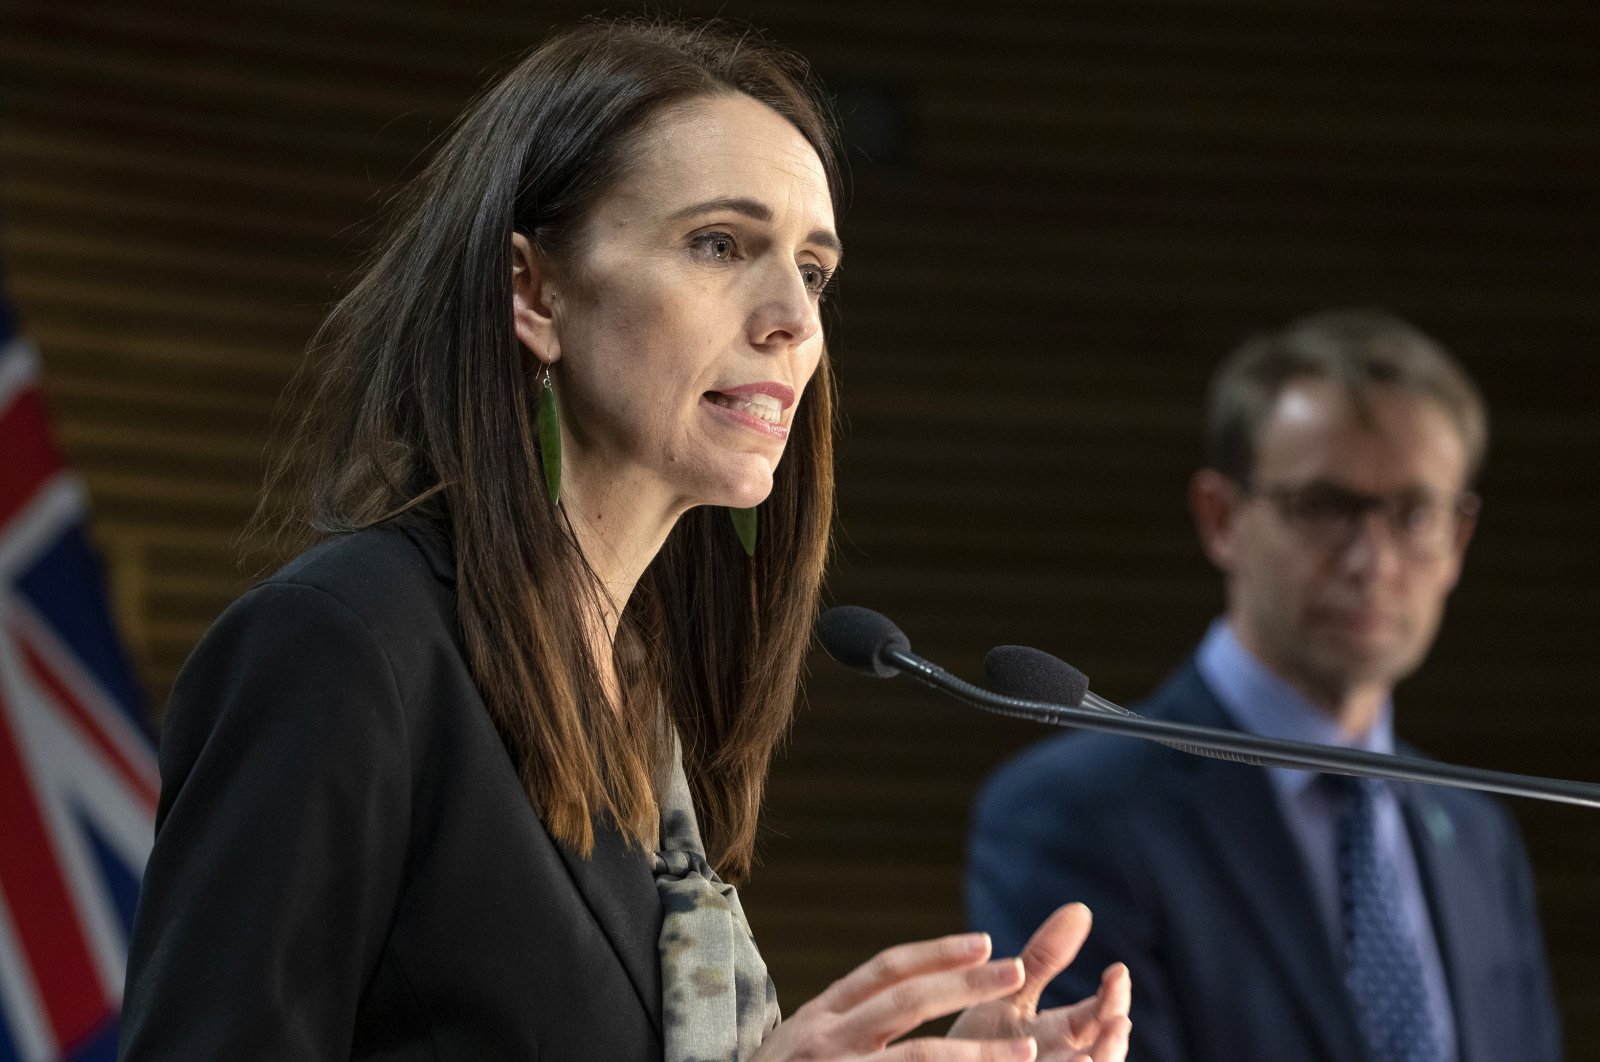 New Zealand Prime Minister Jacinda Ardern (L), and Director of Health Ashley Bloomfield address a press conference in Wellington, New Zealand, Aug. 12, 2020. (AP Photo)